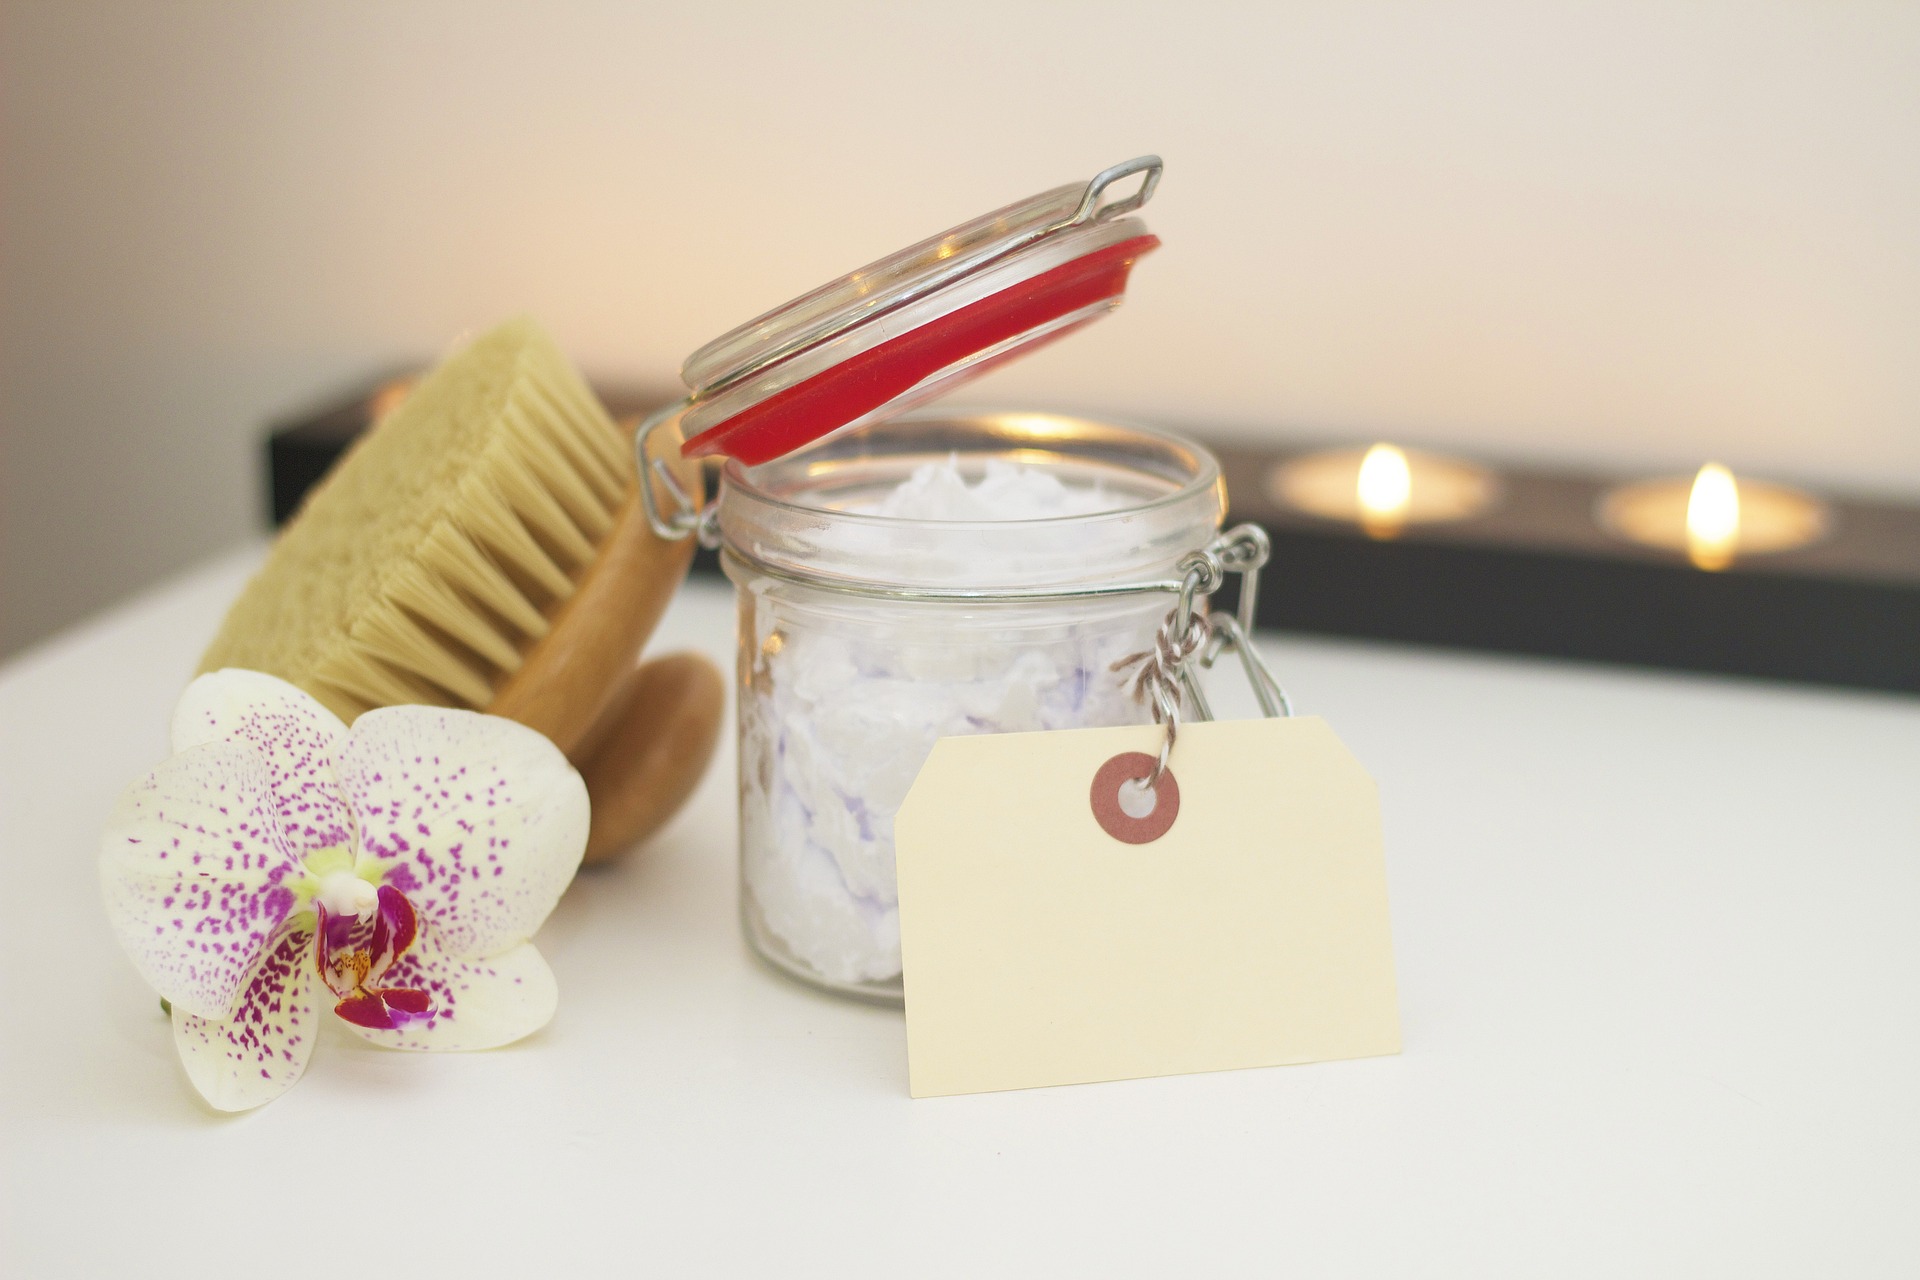 Green Beauty: How to Incorporate Sustainability Practices into Your Beauty Business